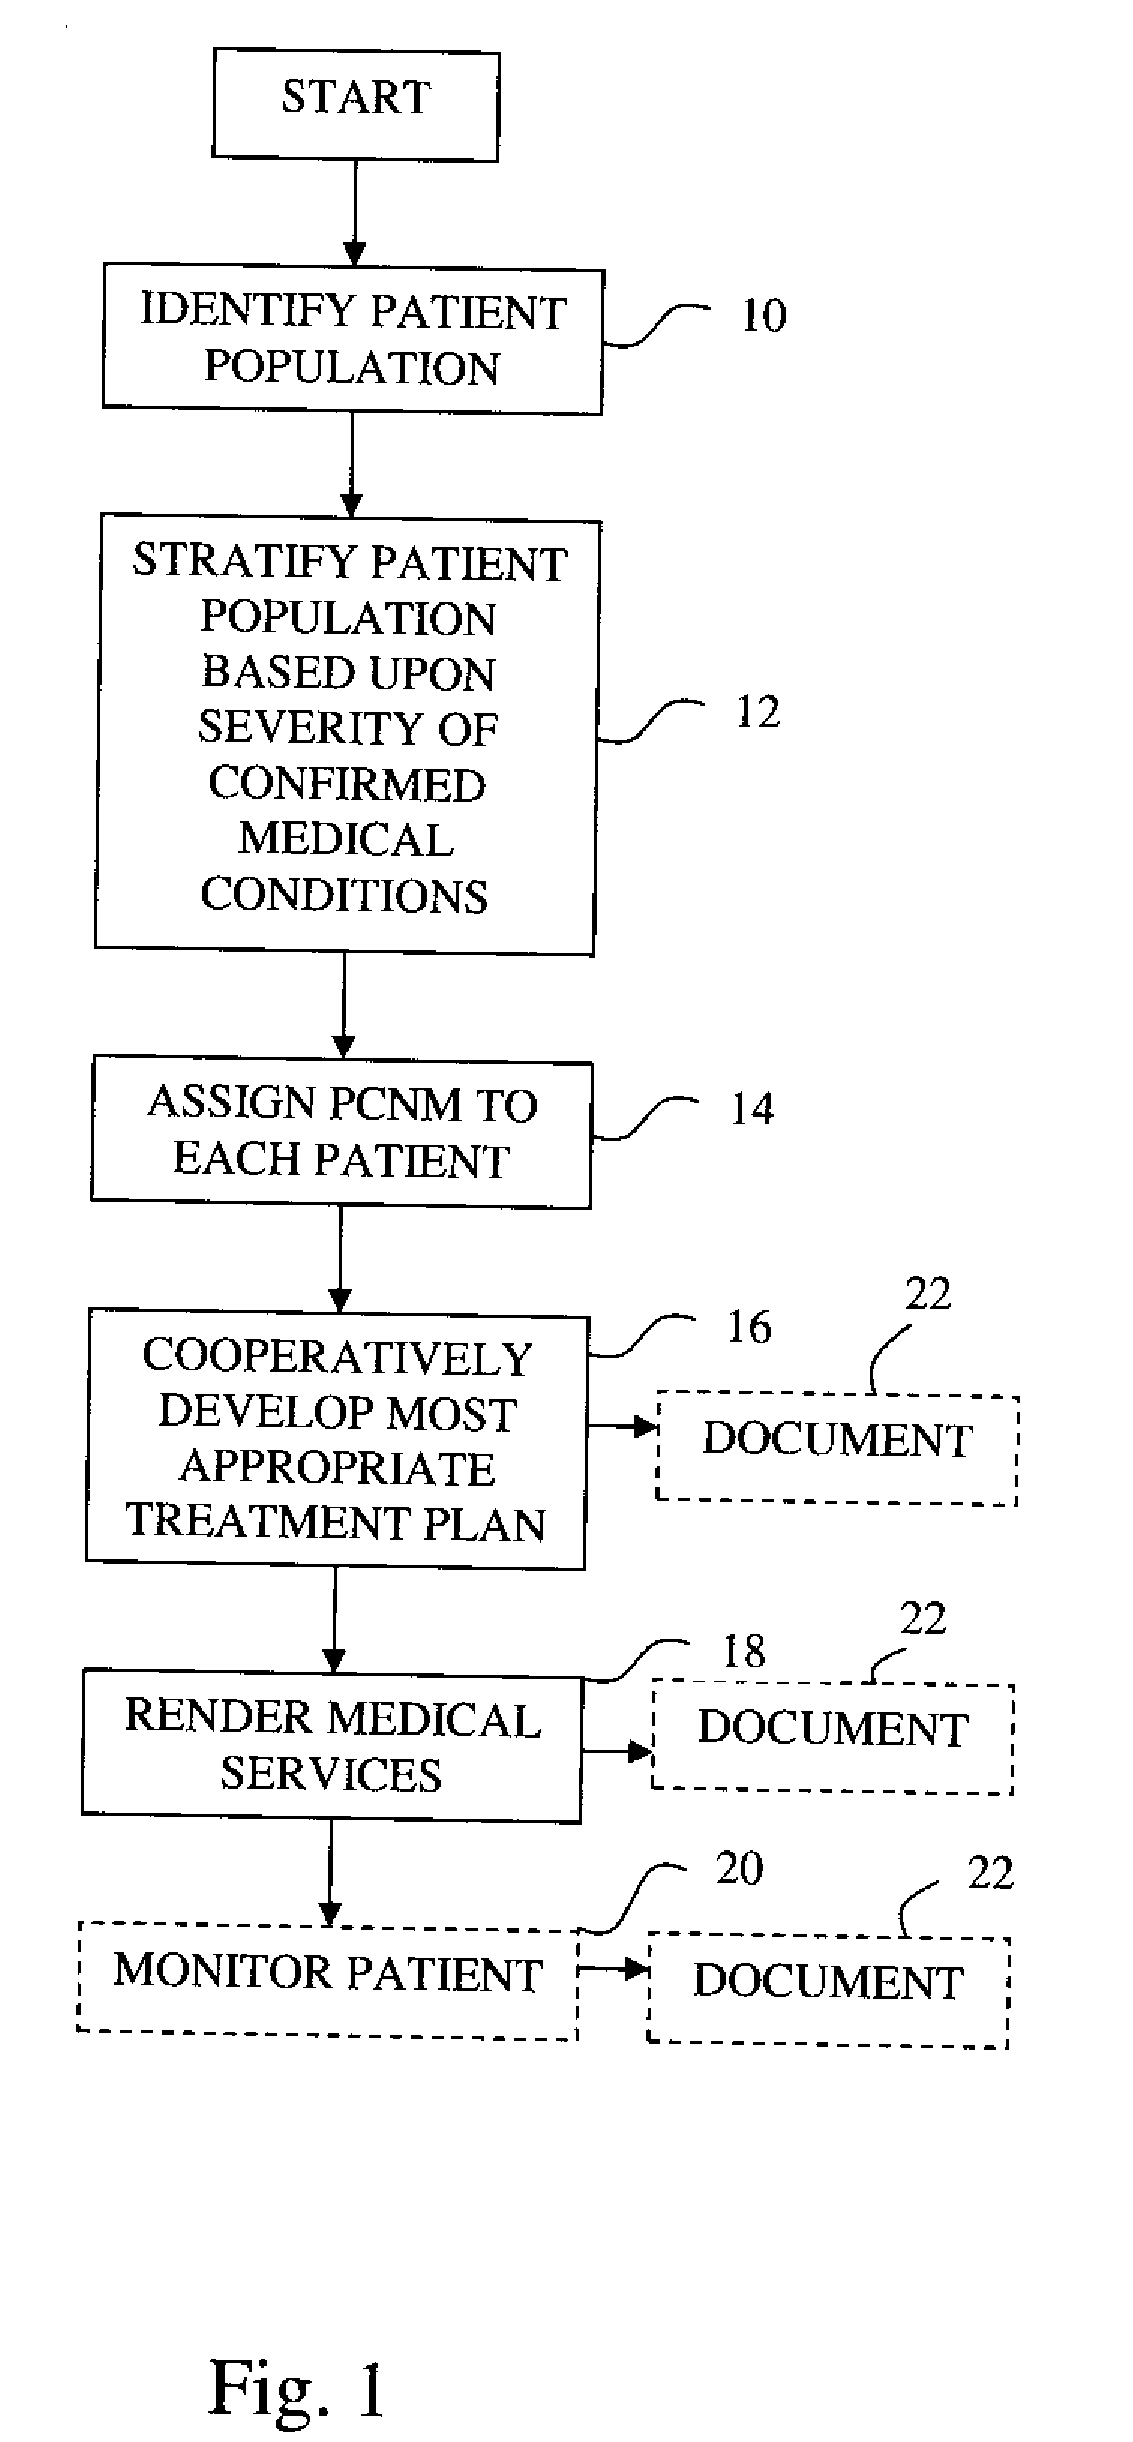 System and method of prioritizing and administering healthcare to patients having multiple integral diagnoses